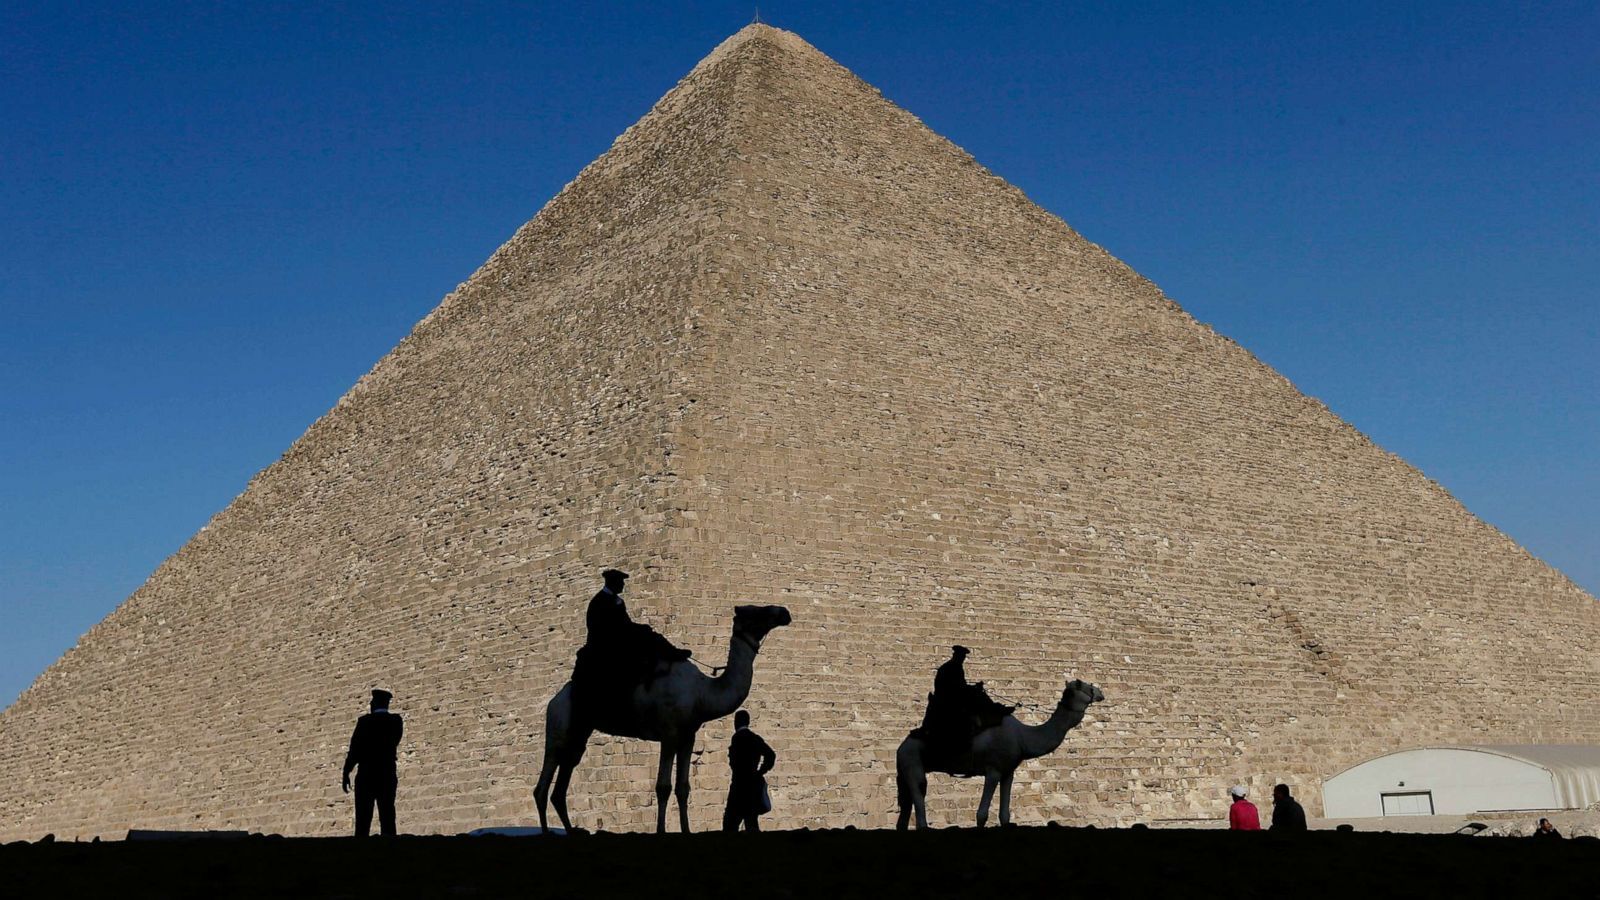 Egyptian man climbs Great Pyramid of Giza and throws stones at security